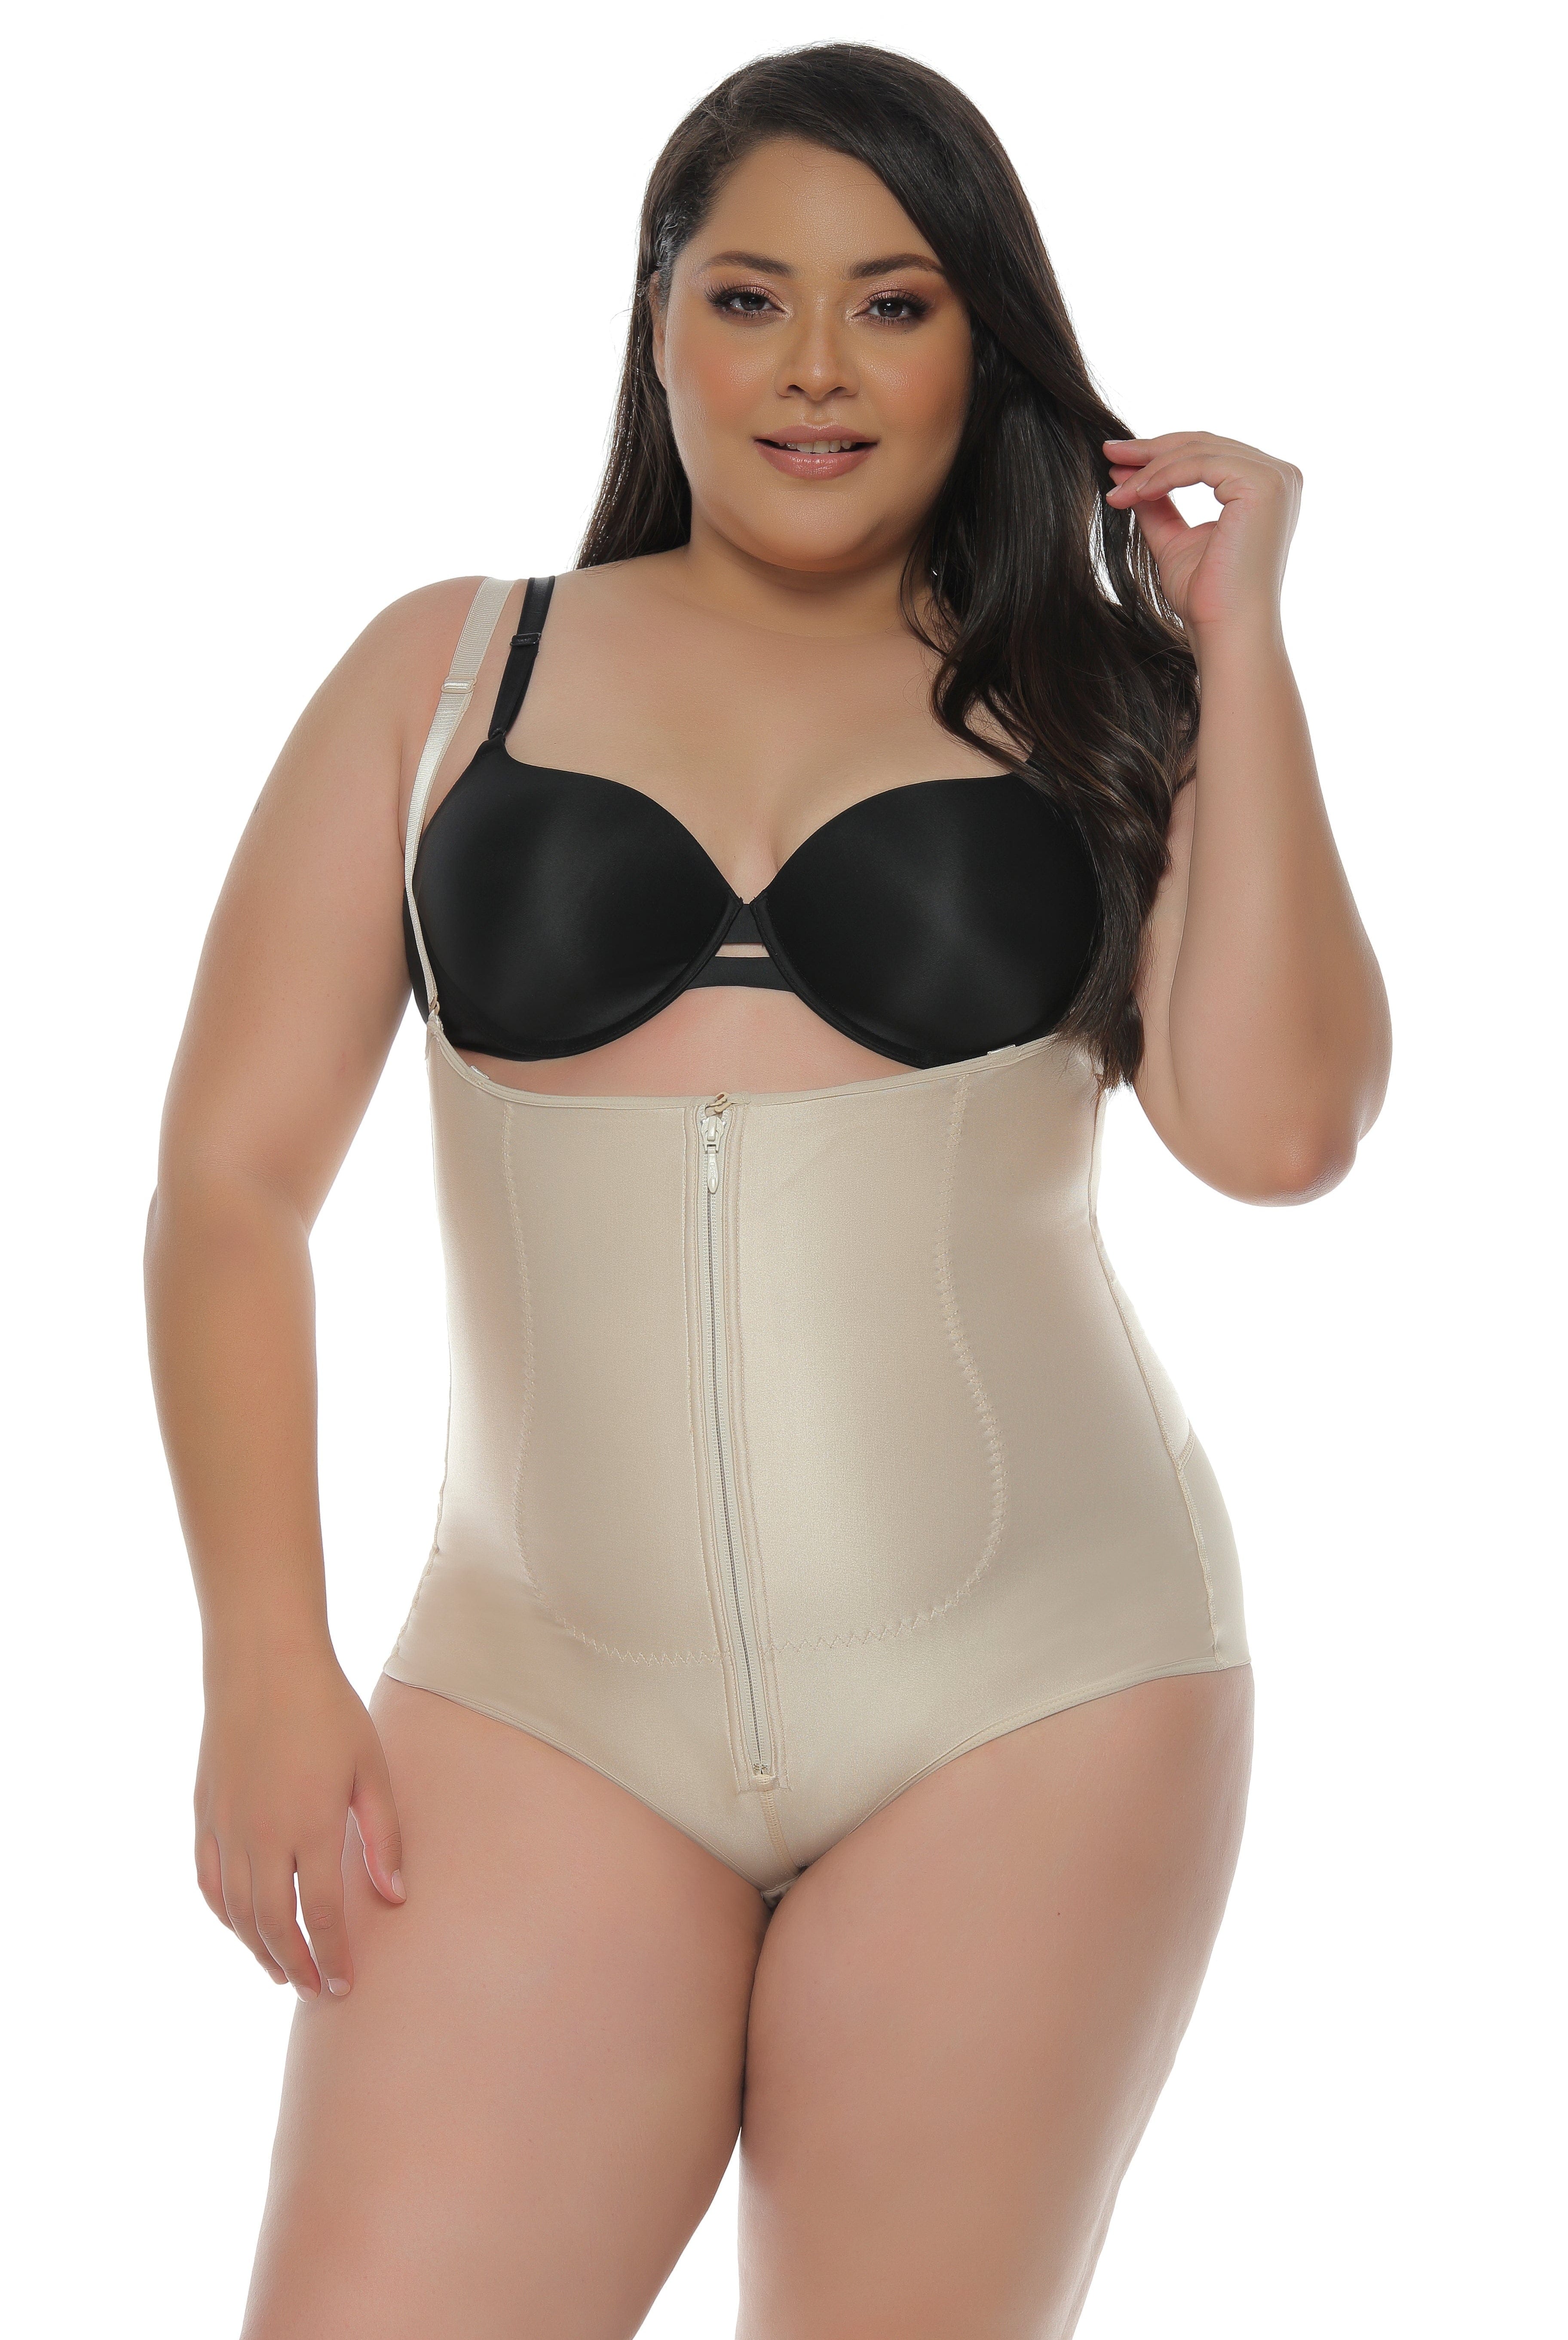 Designed for a no-show, no-flattening look with a ruched center seam for a natural butt-lifting effect.  It has an open bust, wear-your-own bra design.offering firm compression to sculpt your torso and hips. making it comfortable enough to wear all day.